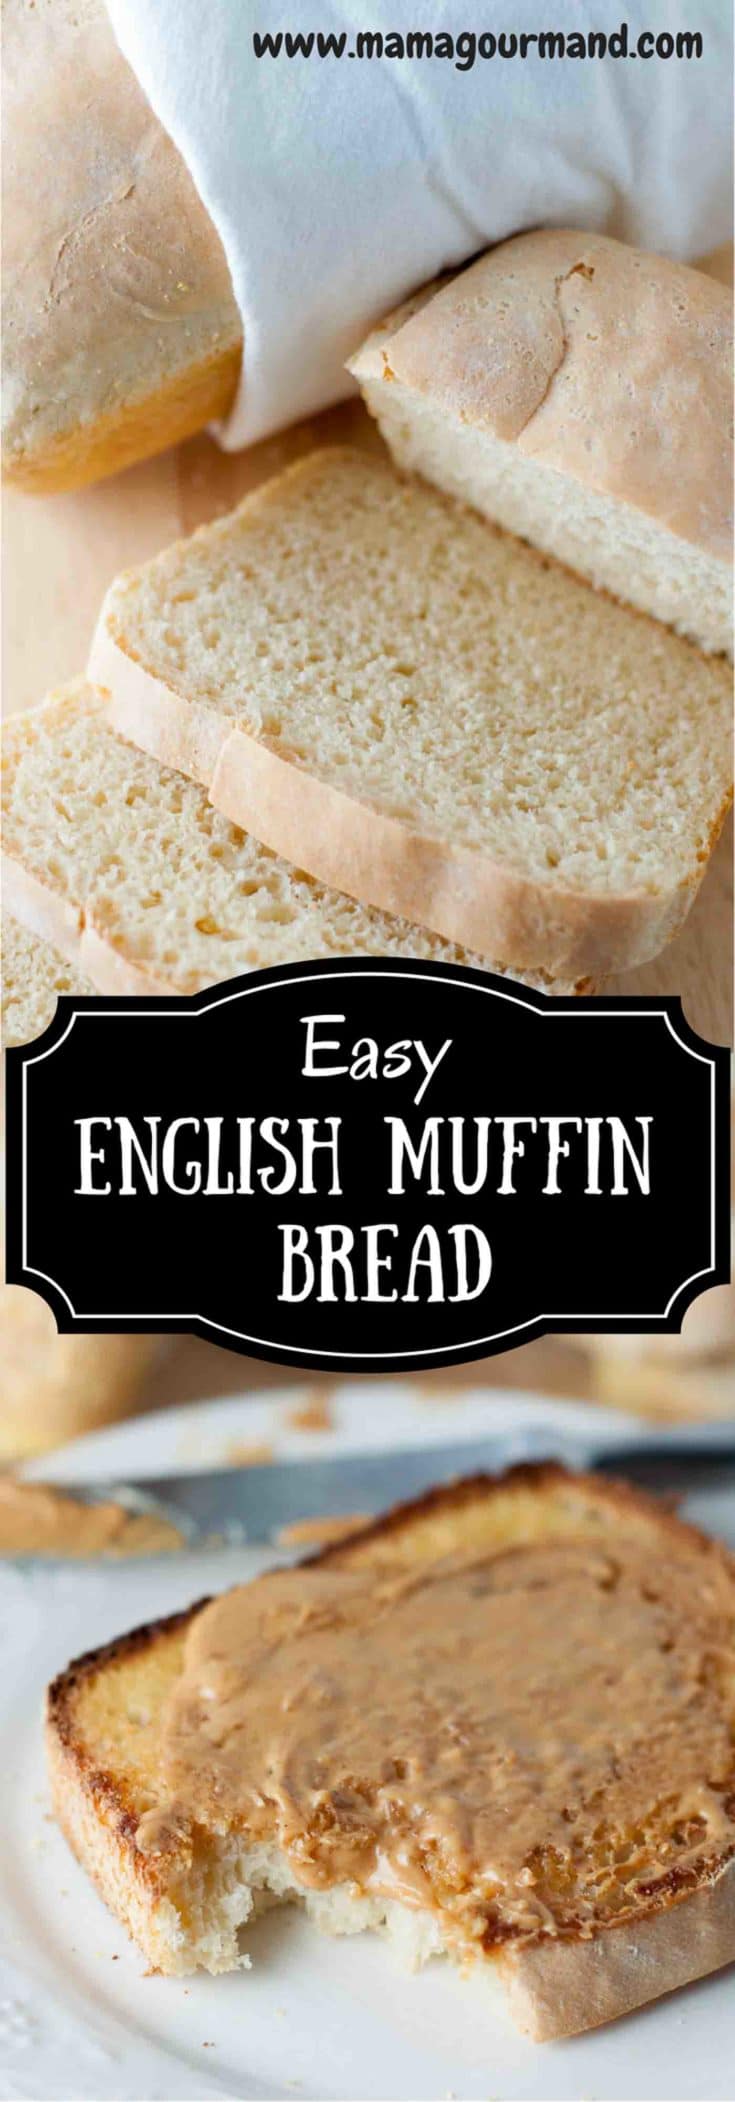 Easy English Muffin Bread is a quick and easy introduction to yeast bread making. It only requires one rise, so you'll be enjoying delicious homemade bread in no time at all! https://www.mamagourmand.com